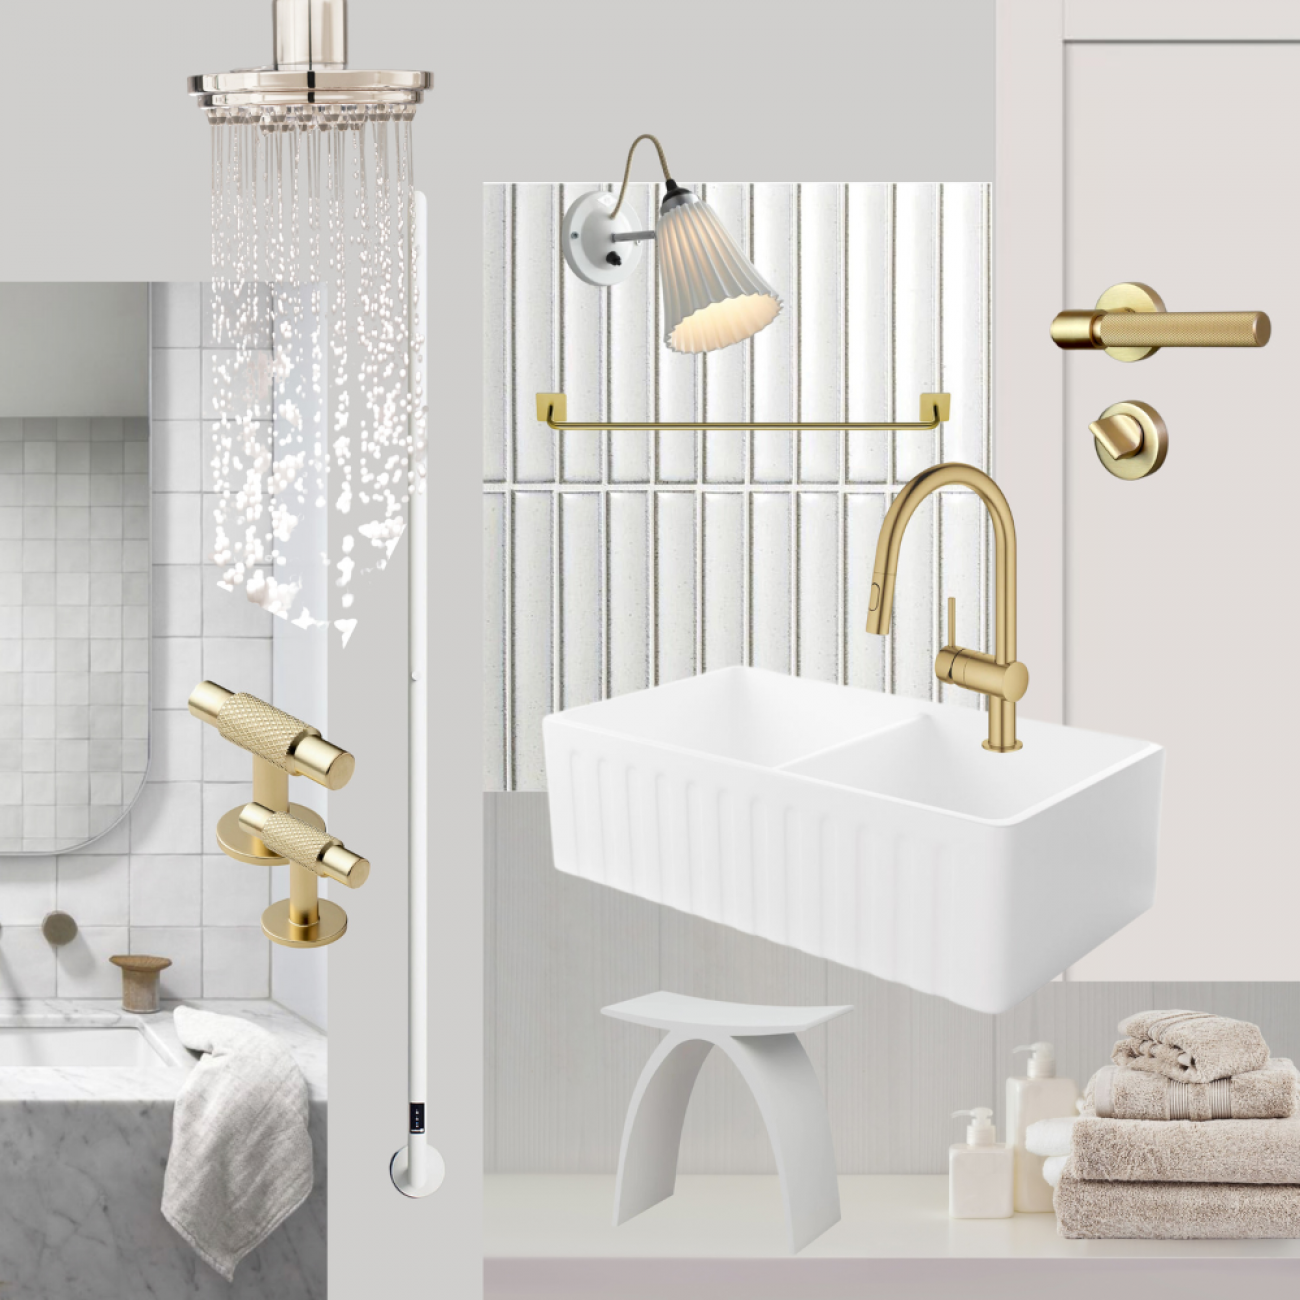 Interior design tips for your bathroom with KYD